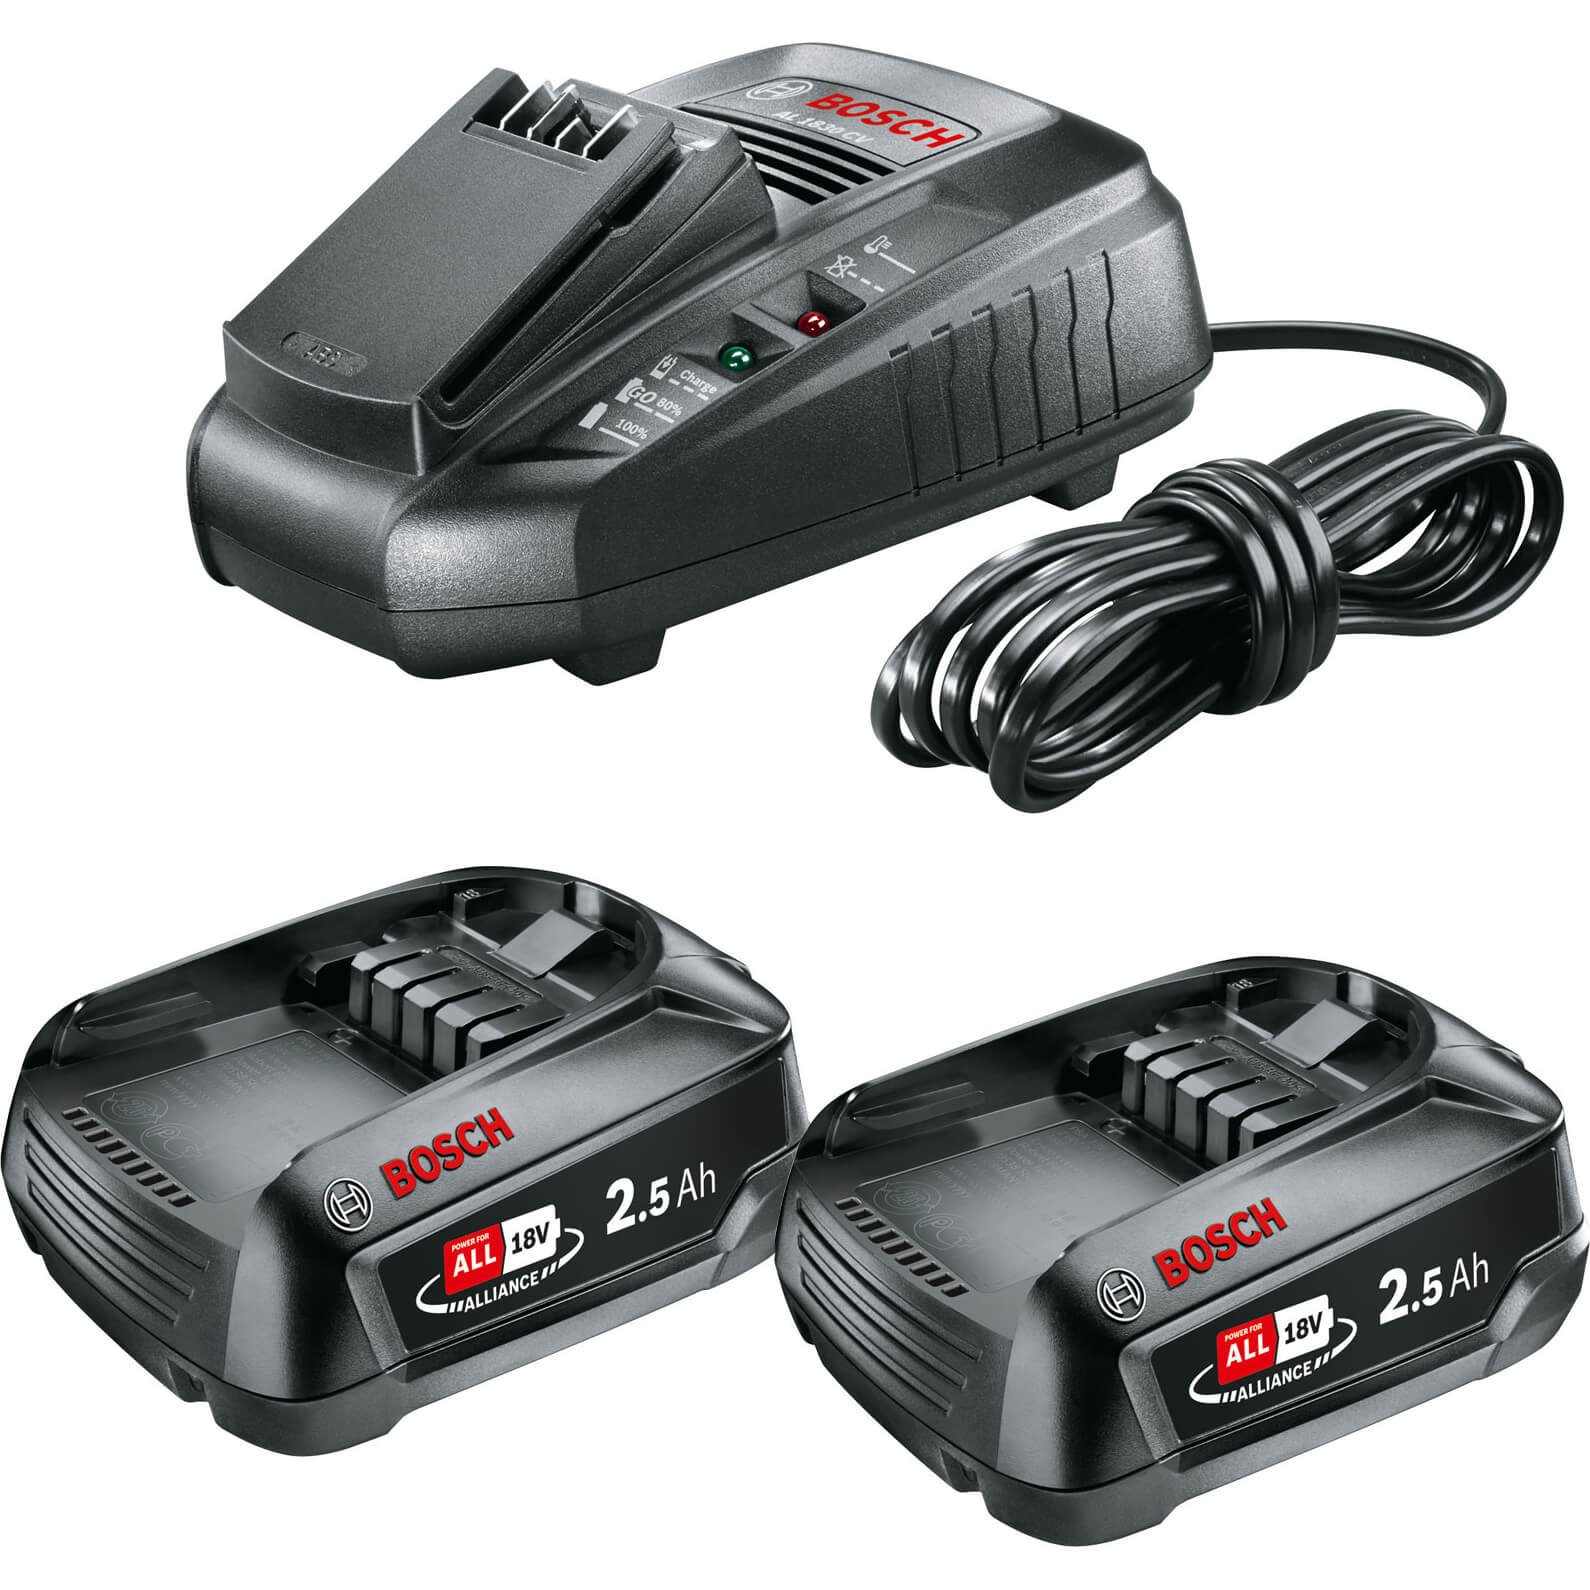 Bosch Genuine GREEN P4A 18v Cordless Li-ion Twin Battery 2.5ah and Fast Charger 2.5ah